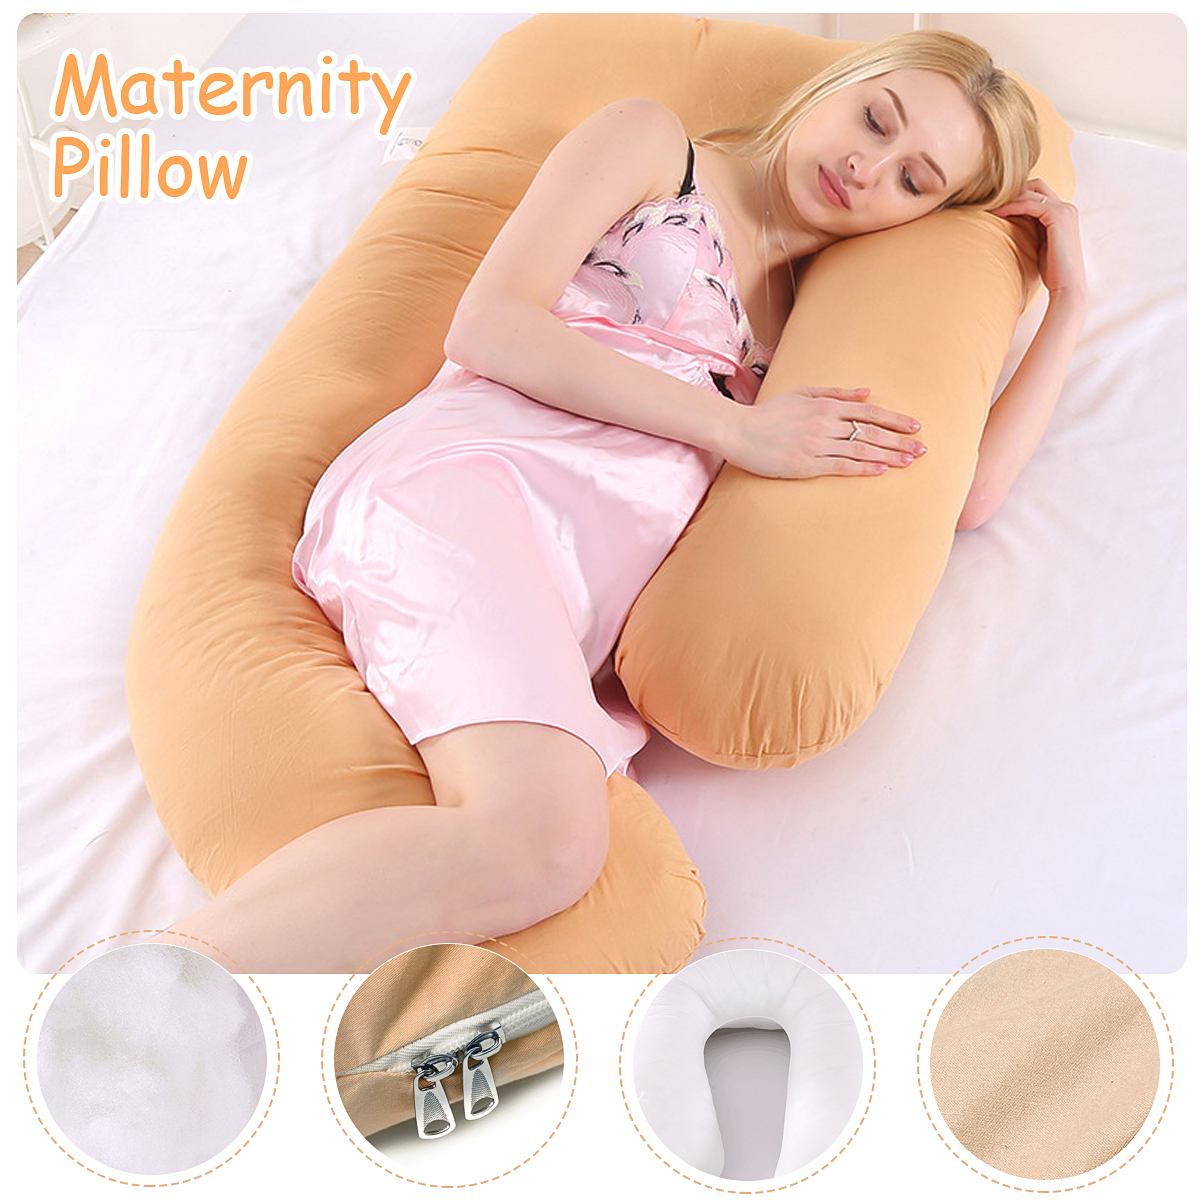 Multi-functional-Mother-Pillow-Side-Sleeper-Pure-Cotton-Removable-Washable-U-shaped-Napping-Pillowca-1809583-1